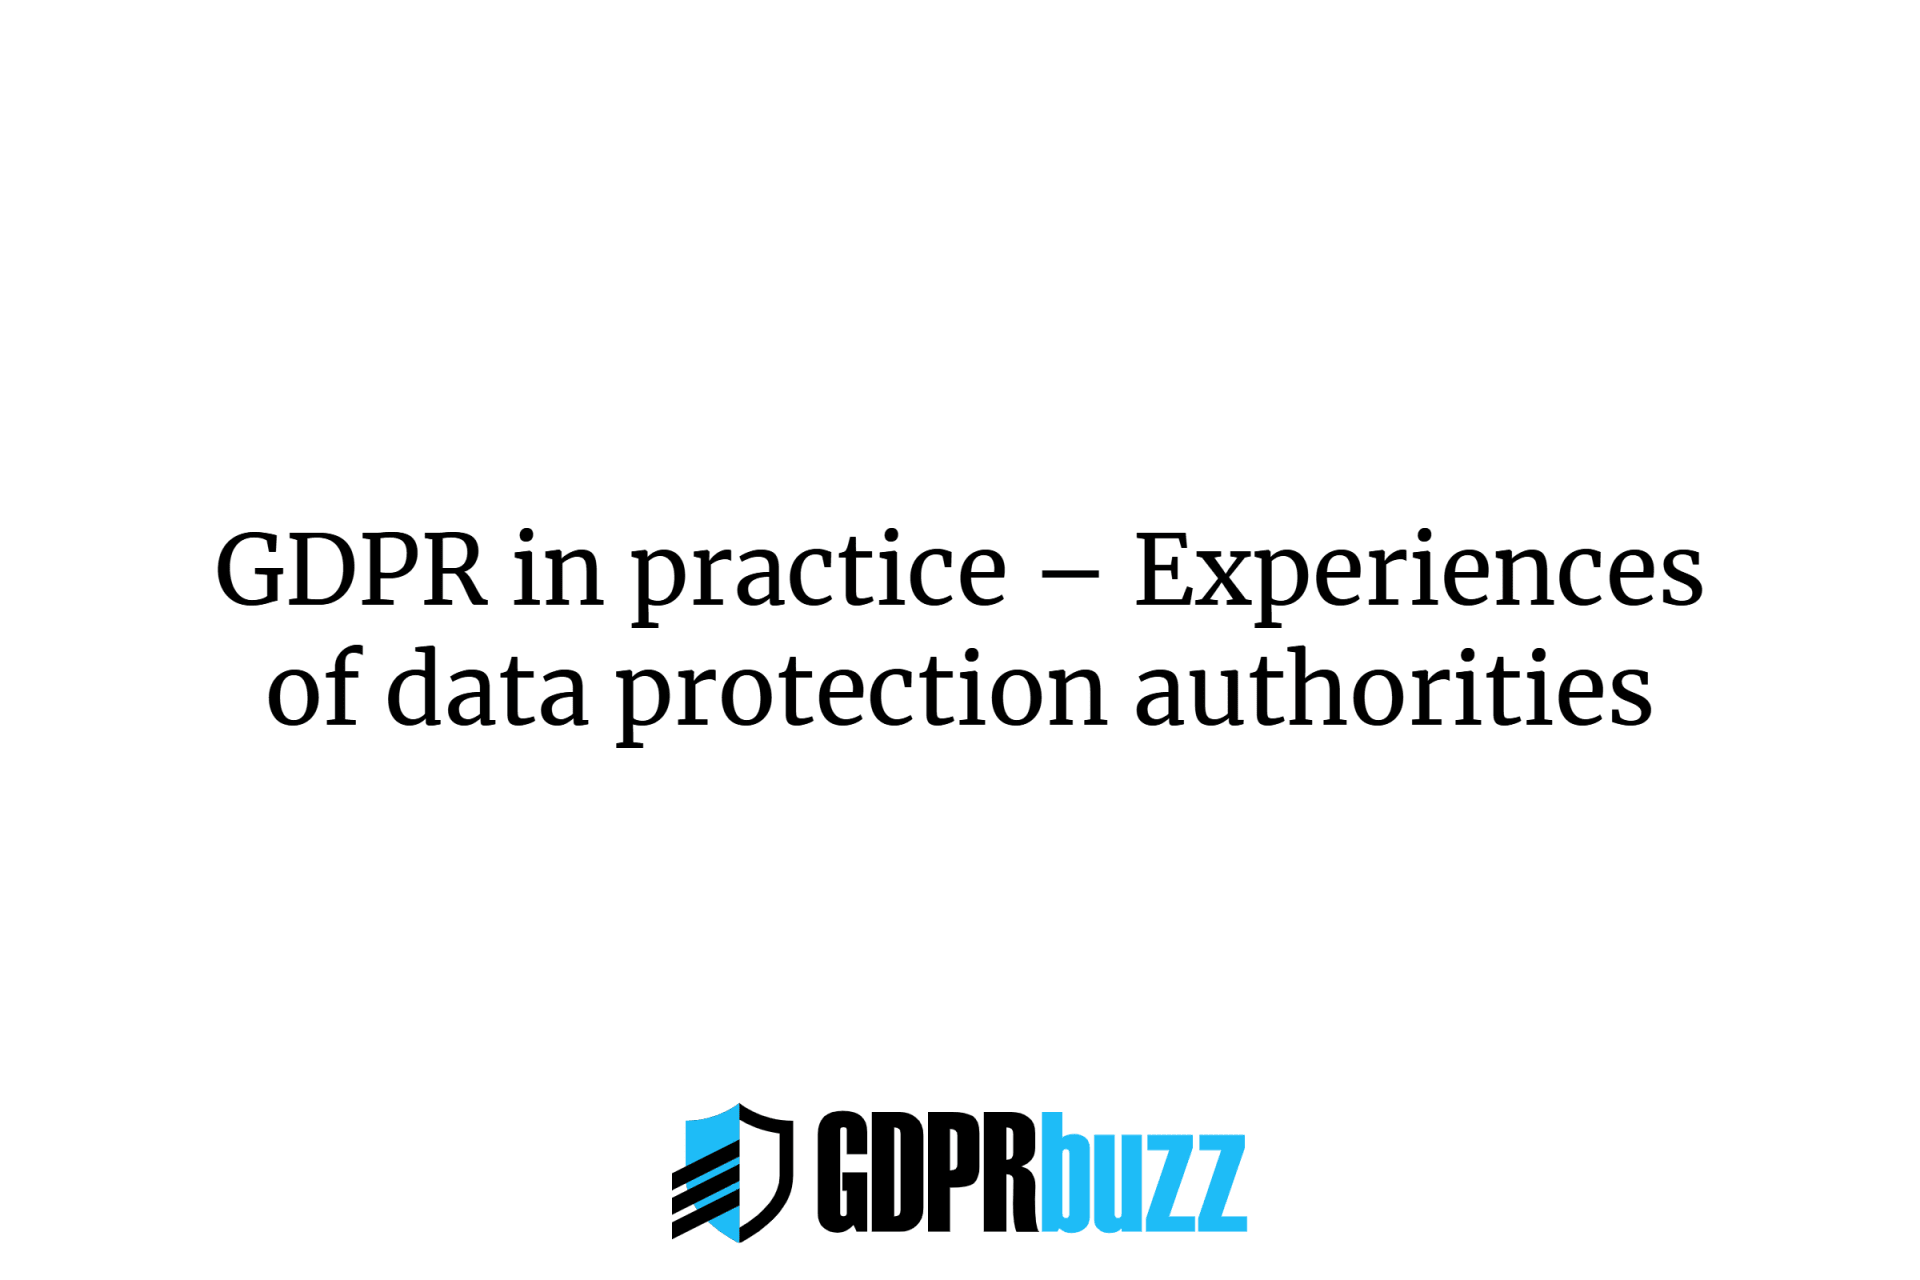 Gdpr in practice – experiences of data protection authorities